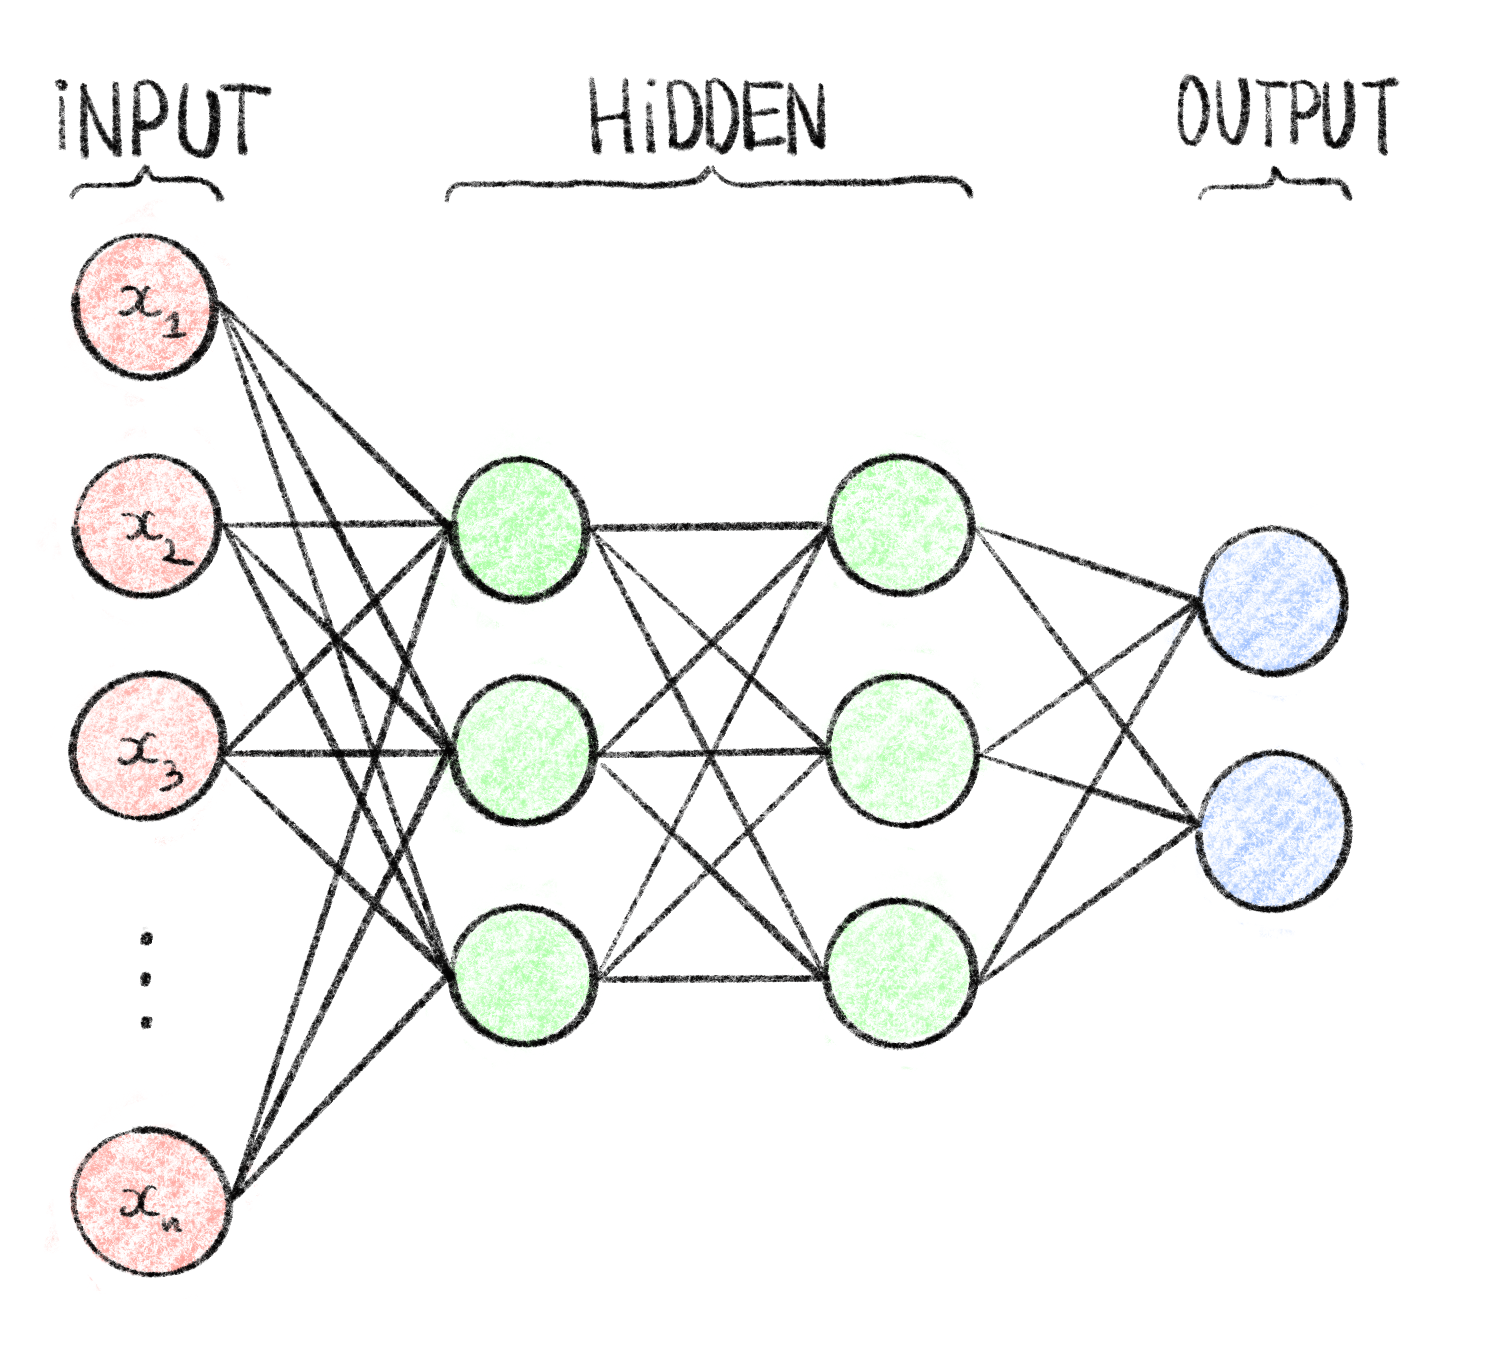 **Computational graph of a multilayer perceptron.**  
This MLP, also called feedforward neural network, has $n$ inputs $\{x_1, \ldots, x_n\}$ represented as the input layer, 2 hidden layers of 3 neurons each and an output layer of 2 neurons (e.g. suitable for binary classification). It is fully connected meaning that each node of a given layer is used as input for every neuron of the following layer. Each edge in this graph corresponds to a weight which are the tunable parameters during the training process.